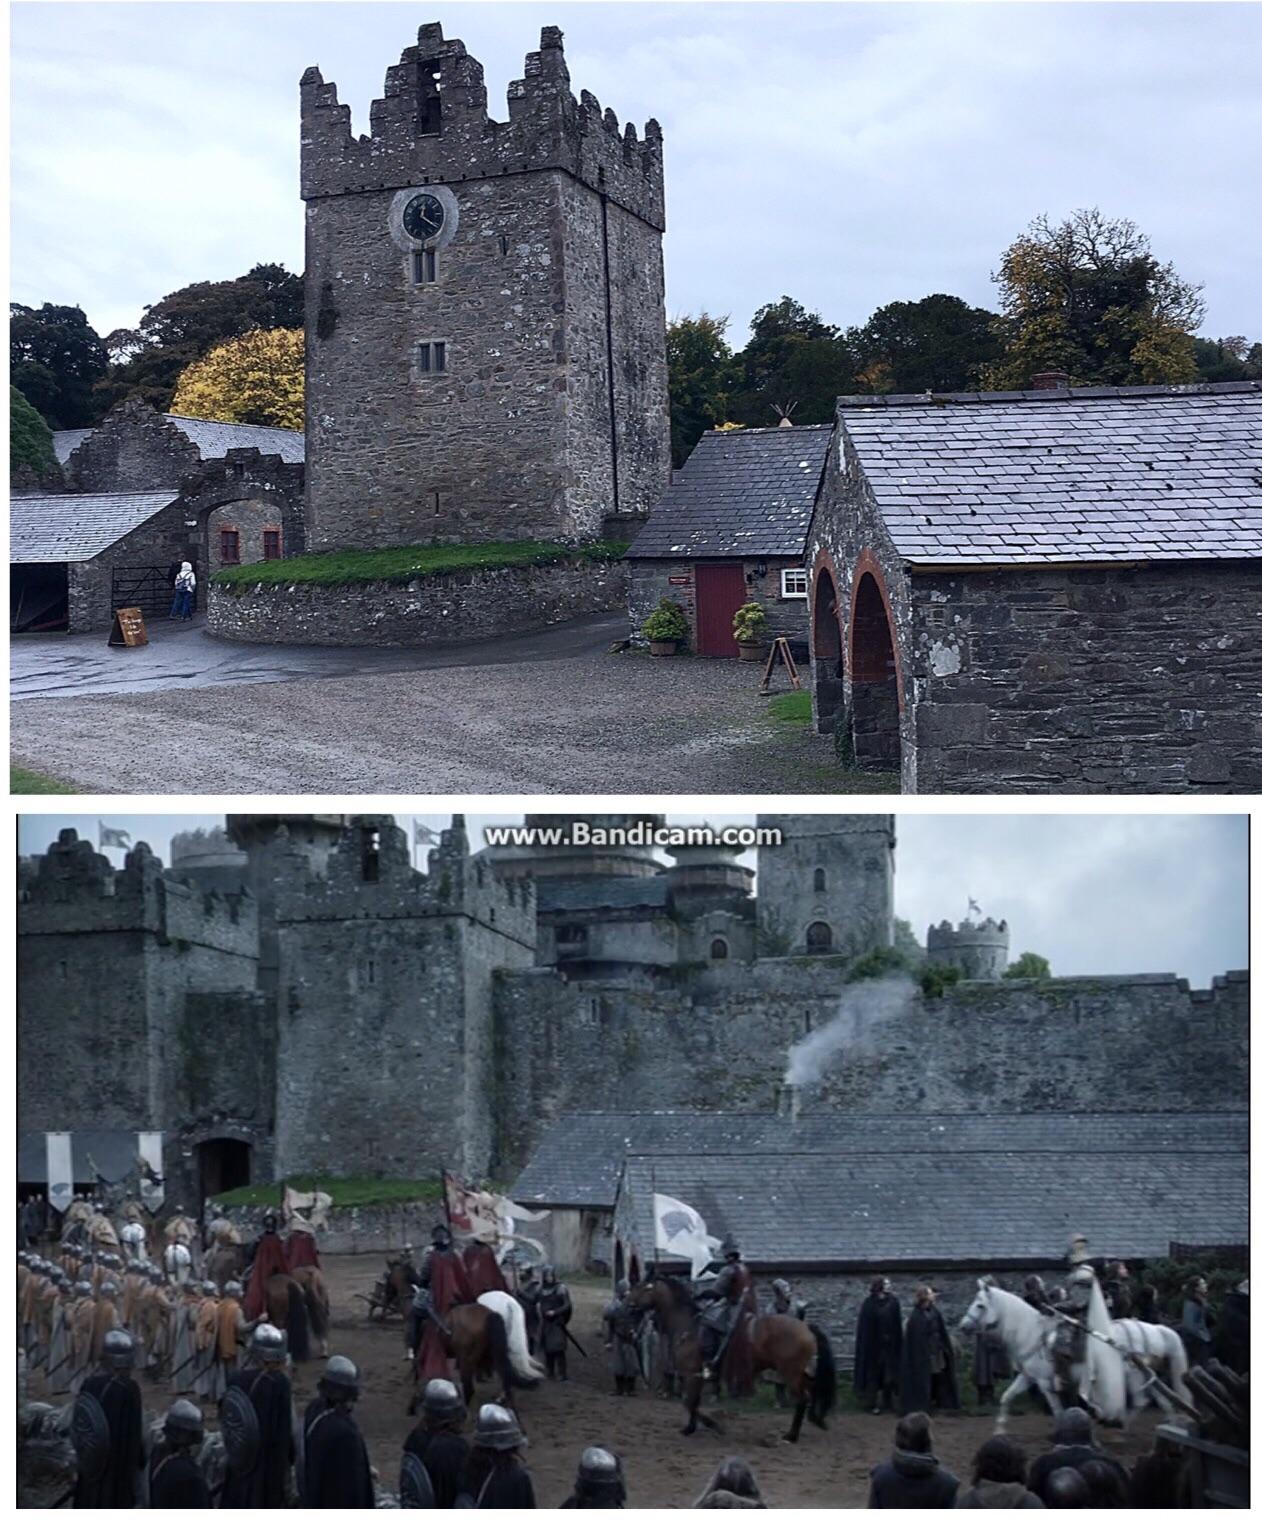 No Spoilers Visited The Filming Location For Winterfell Yesterday